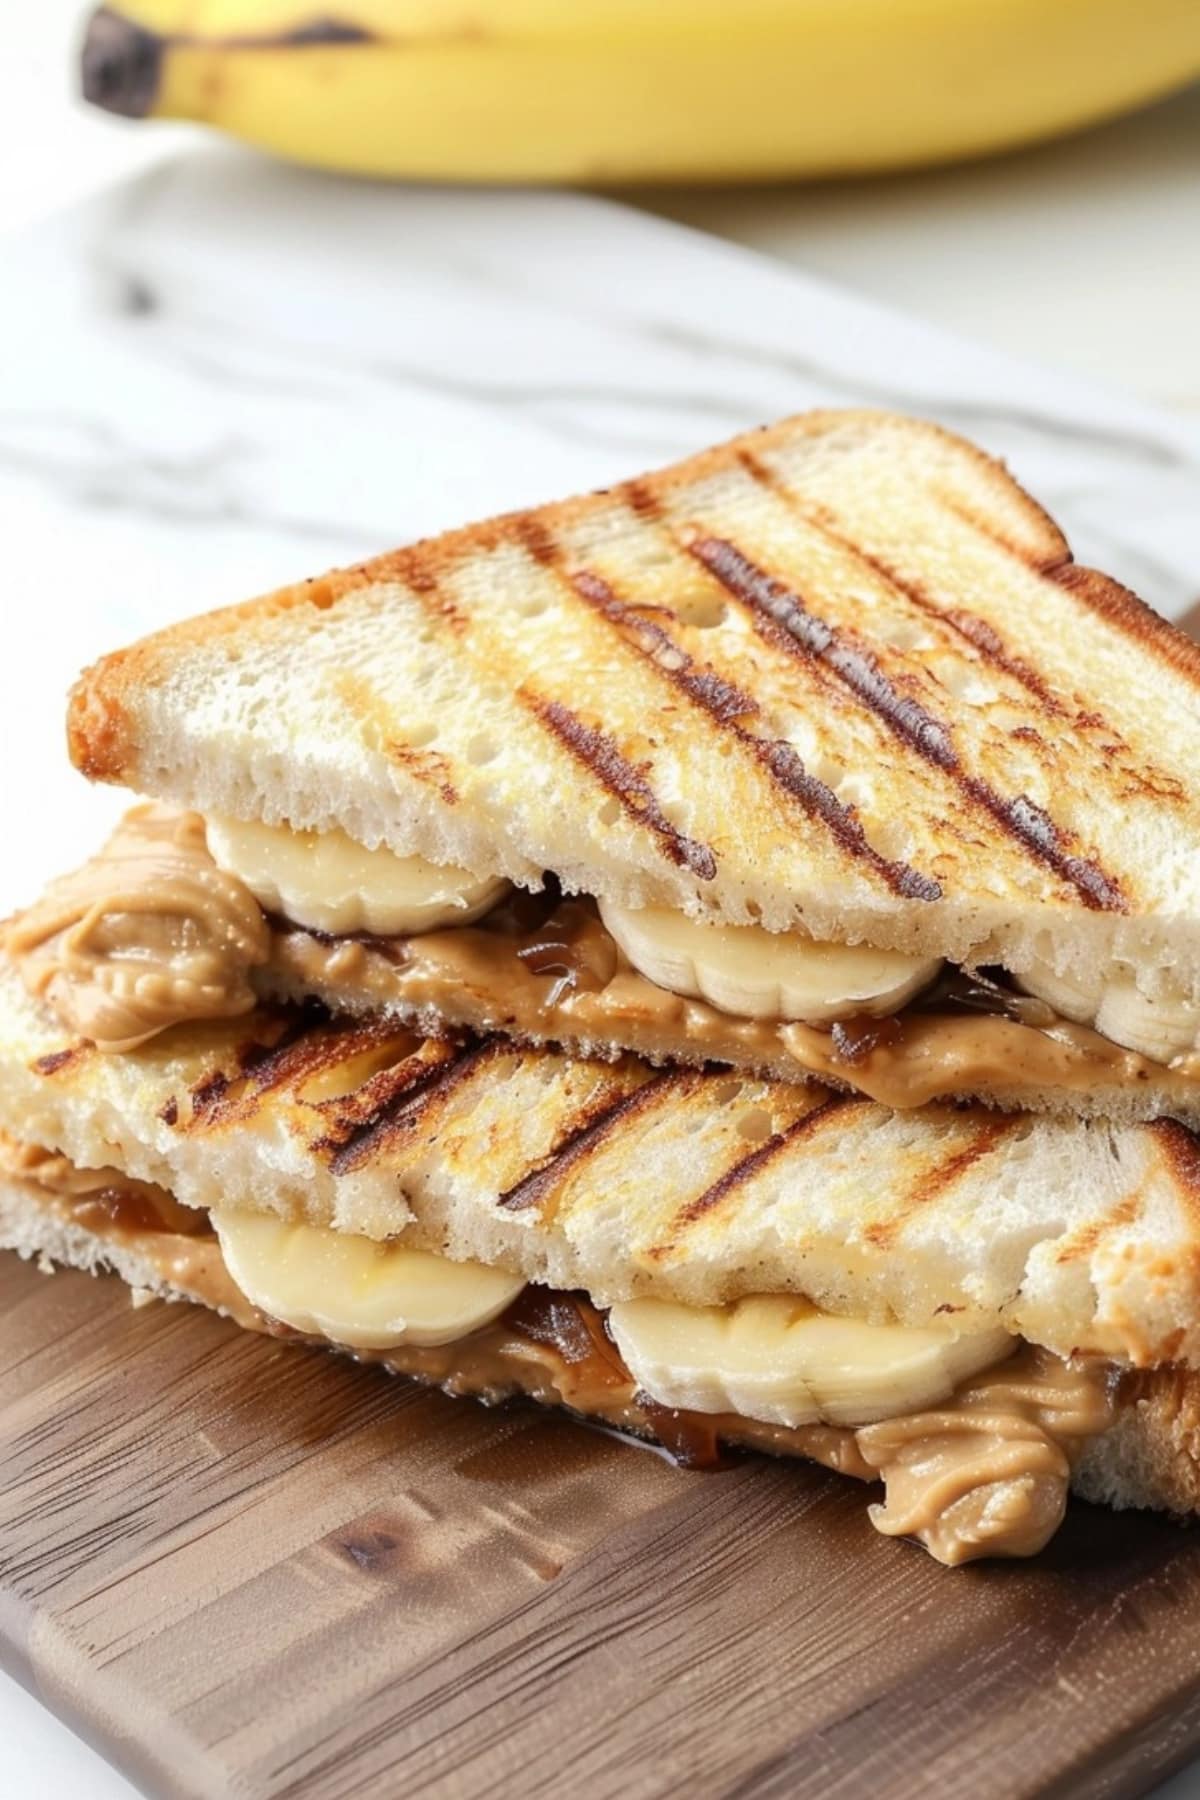 Grilled peanut butter and banana sandwich stack on a wooden board.